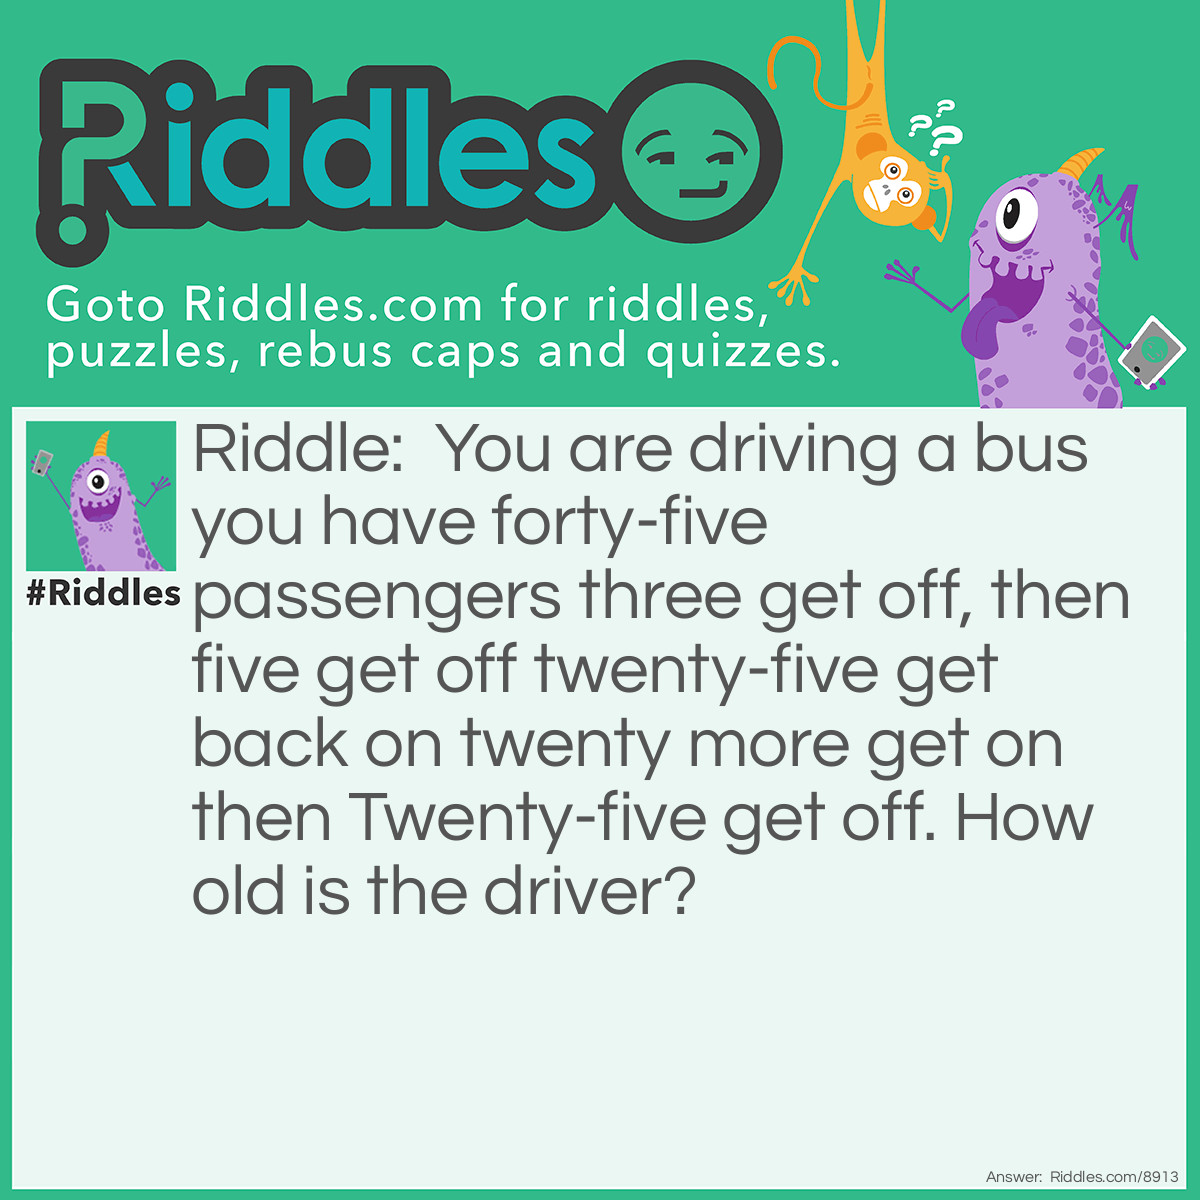 Riddle: You are driving a bus you have forty-five passengers three get off, then five get off twenty-five get back on twenty more get on then Twenty-five get off. How old is the driver? Answer: Your age, you’re the bus driver!